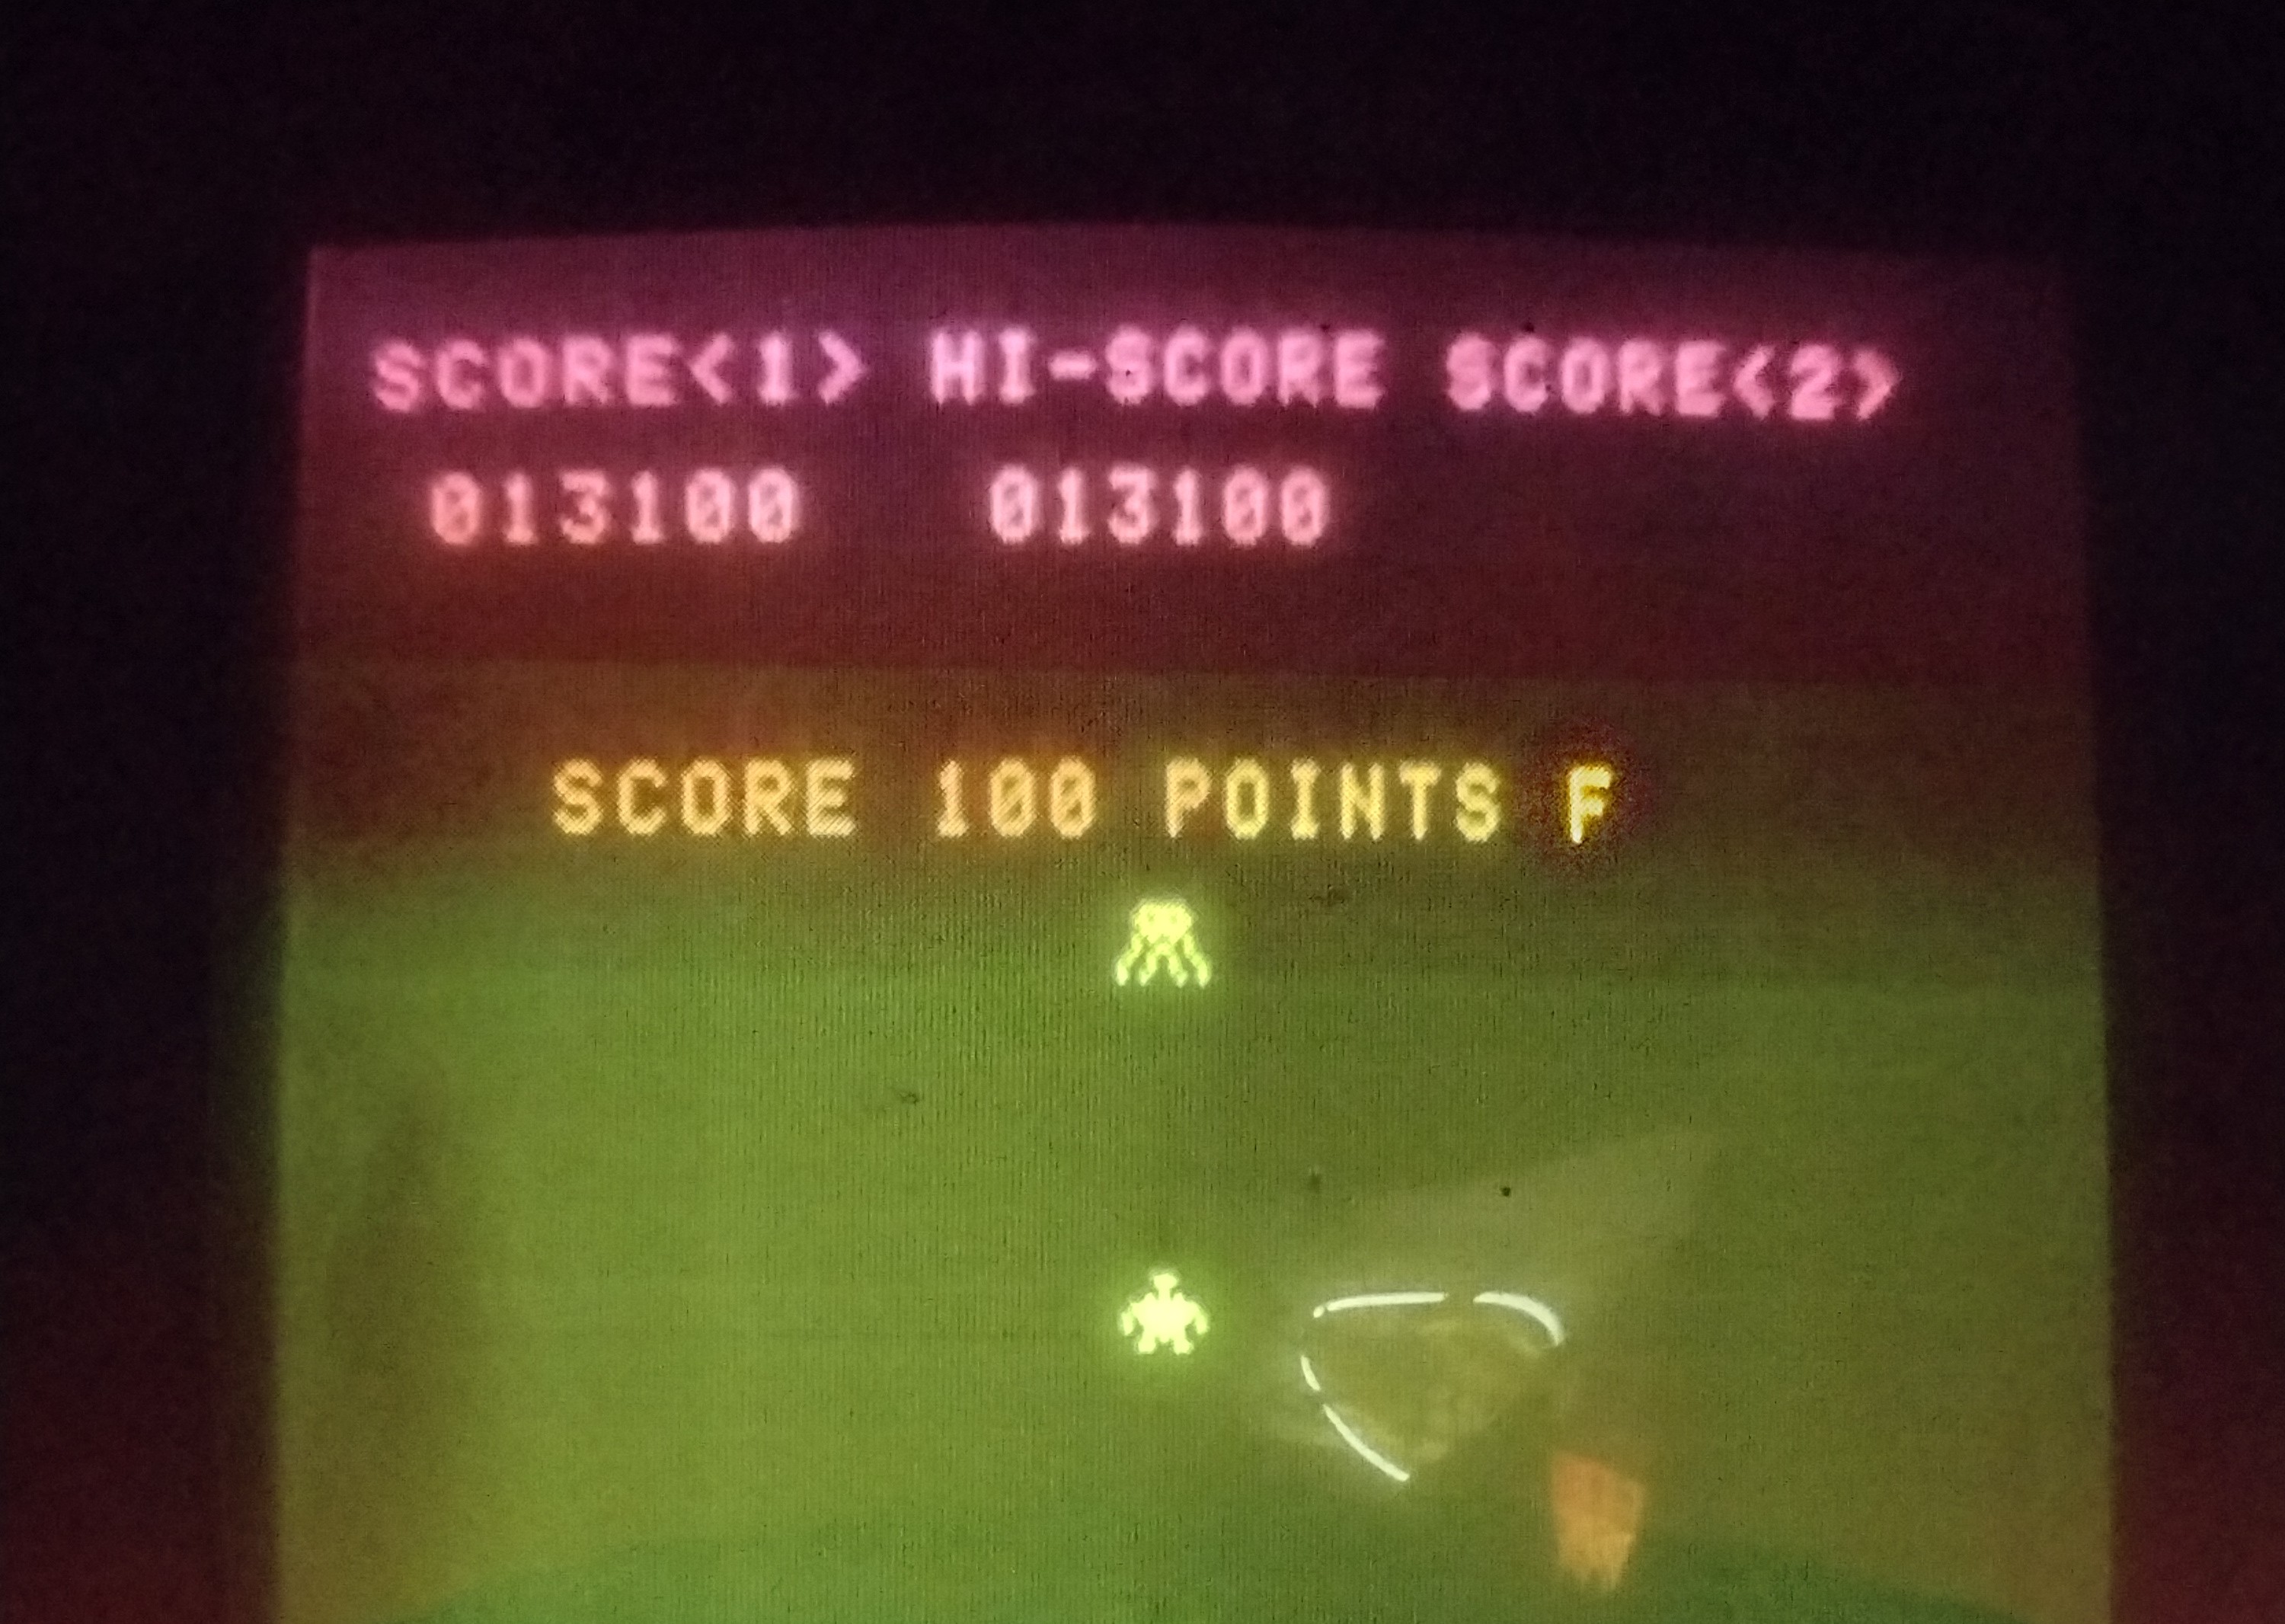 Hauntedprogram: Space Invaders DX: Classic Mode (Arcade) 13,100 points on 2022-07-30 22:42:51